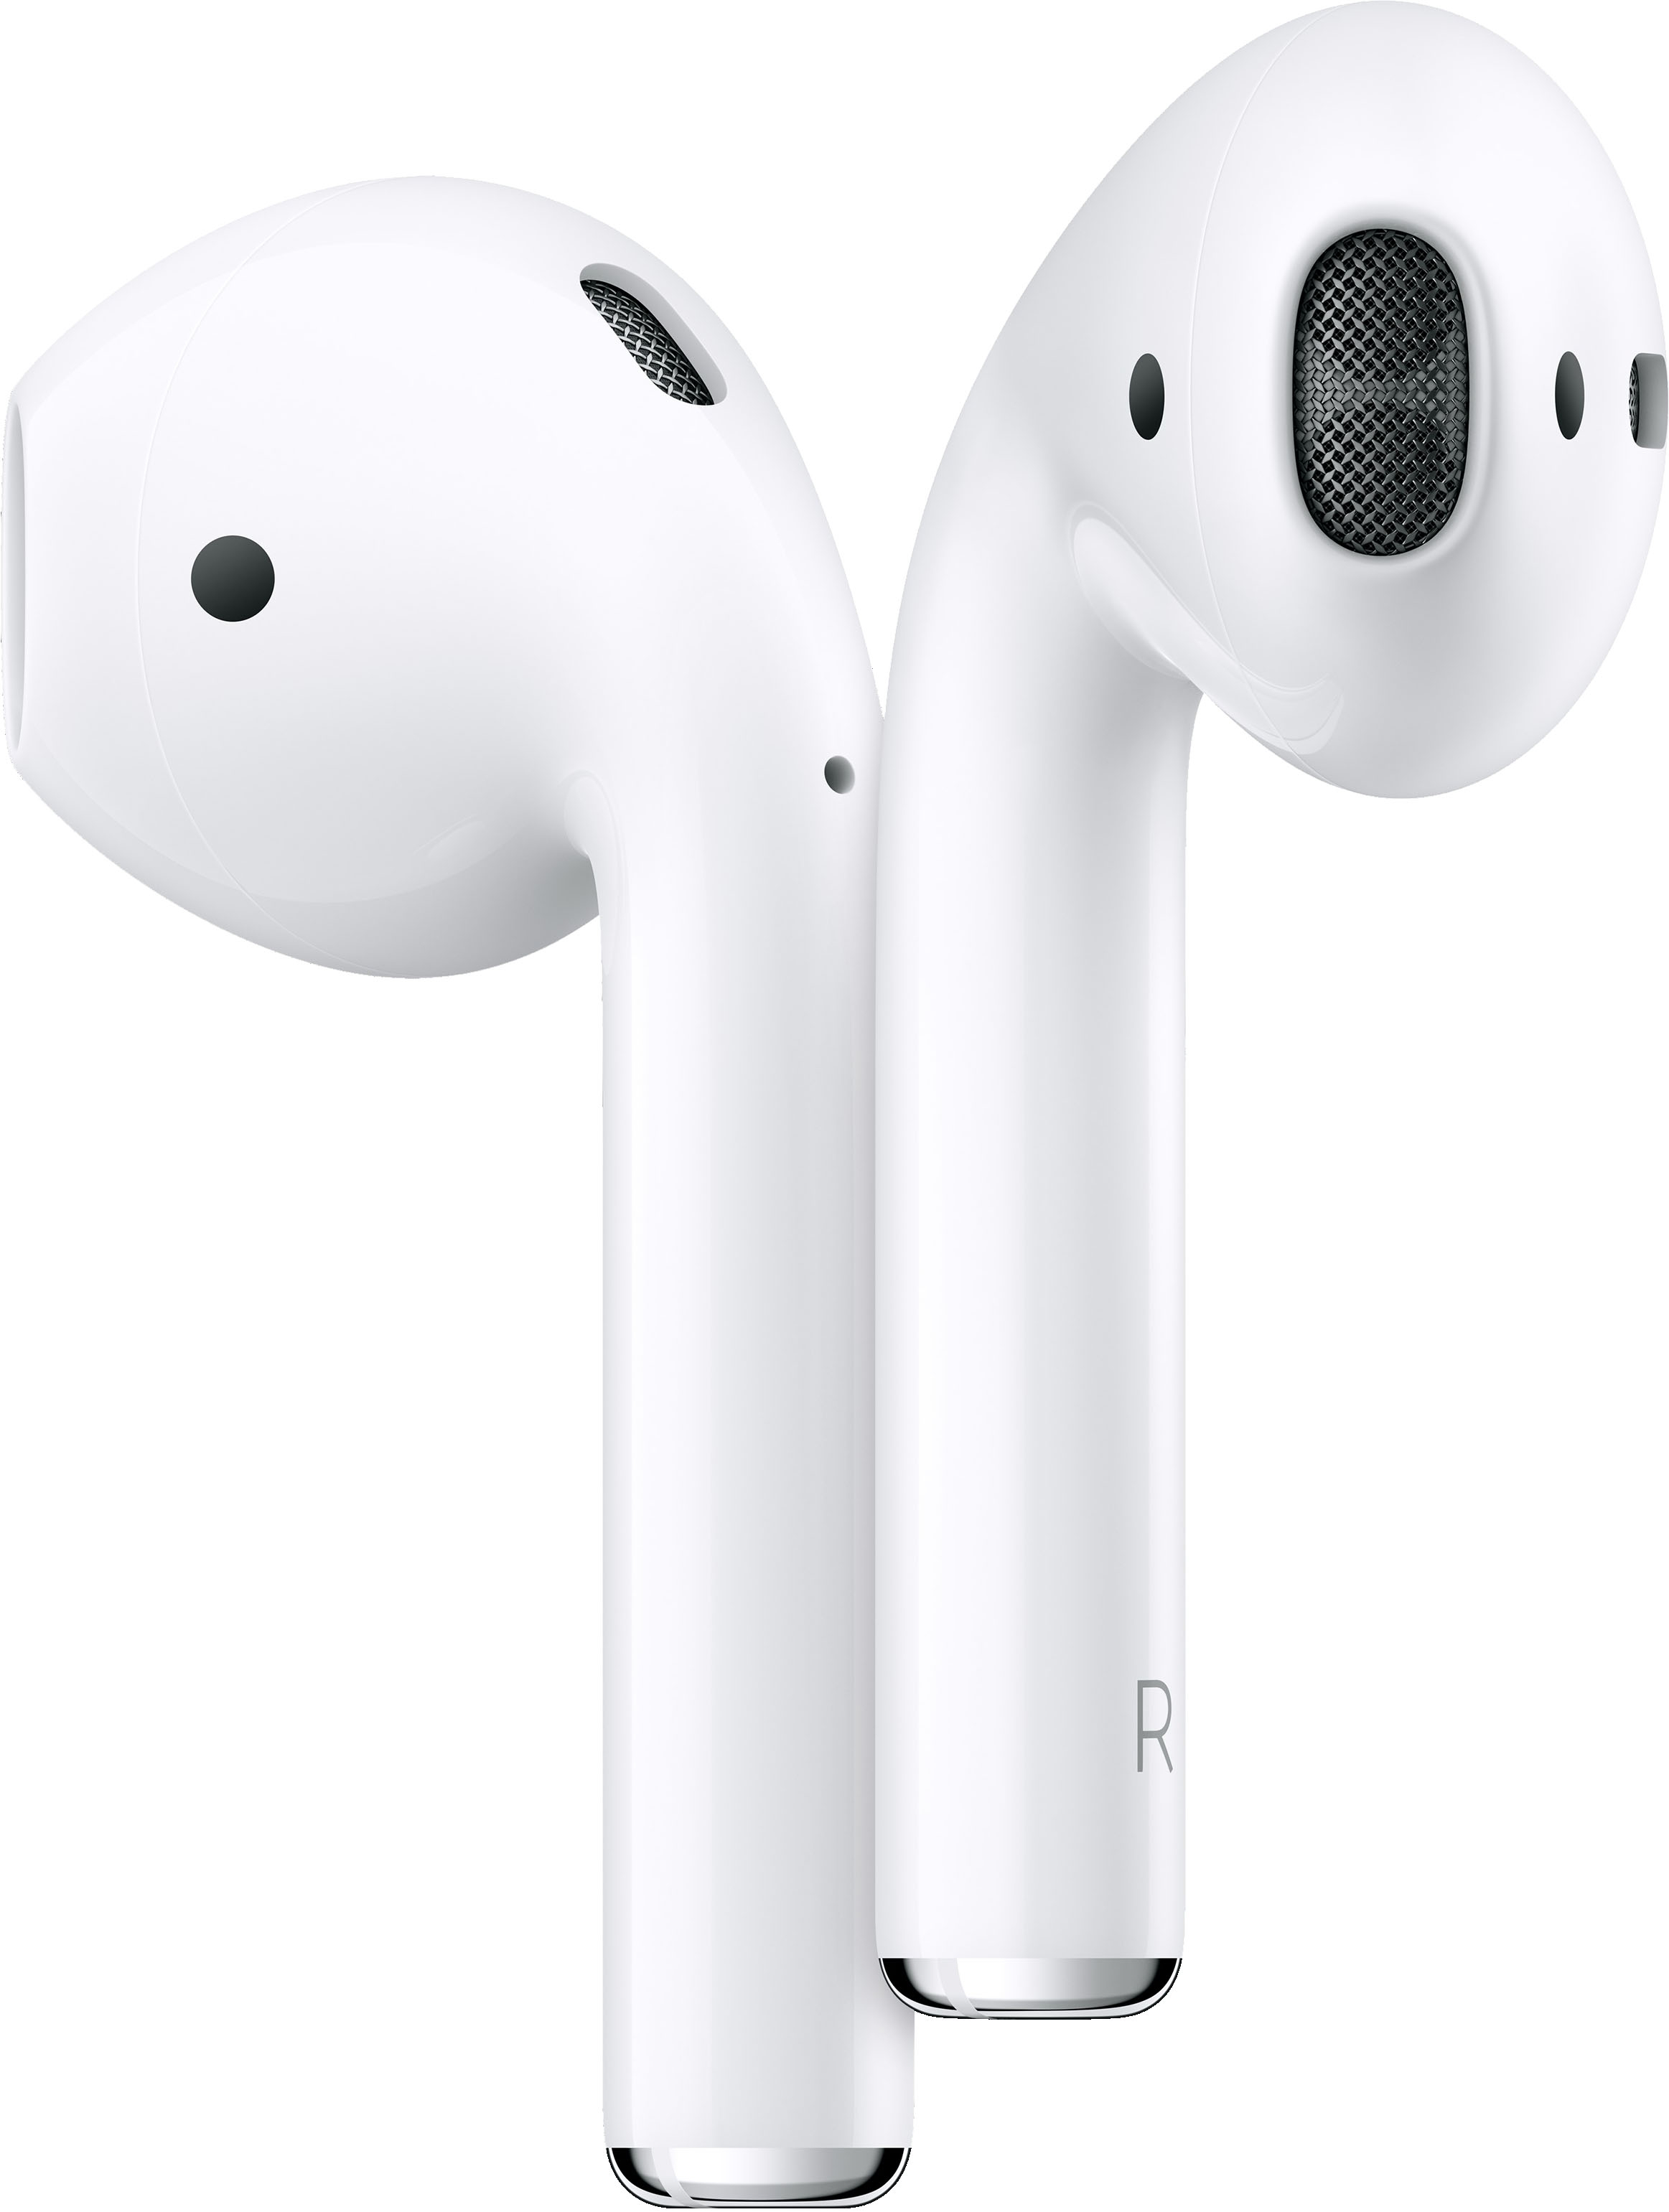 Apple Airpods With Wireless Charging Case Best Buy Flash Sales, 54% OFF |  www.ingeniovirtual.com